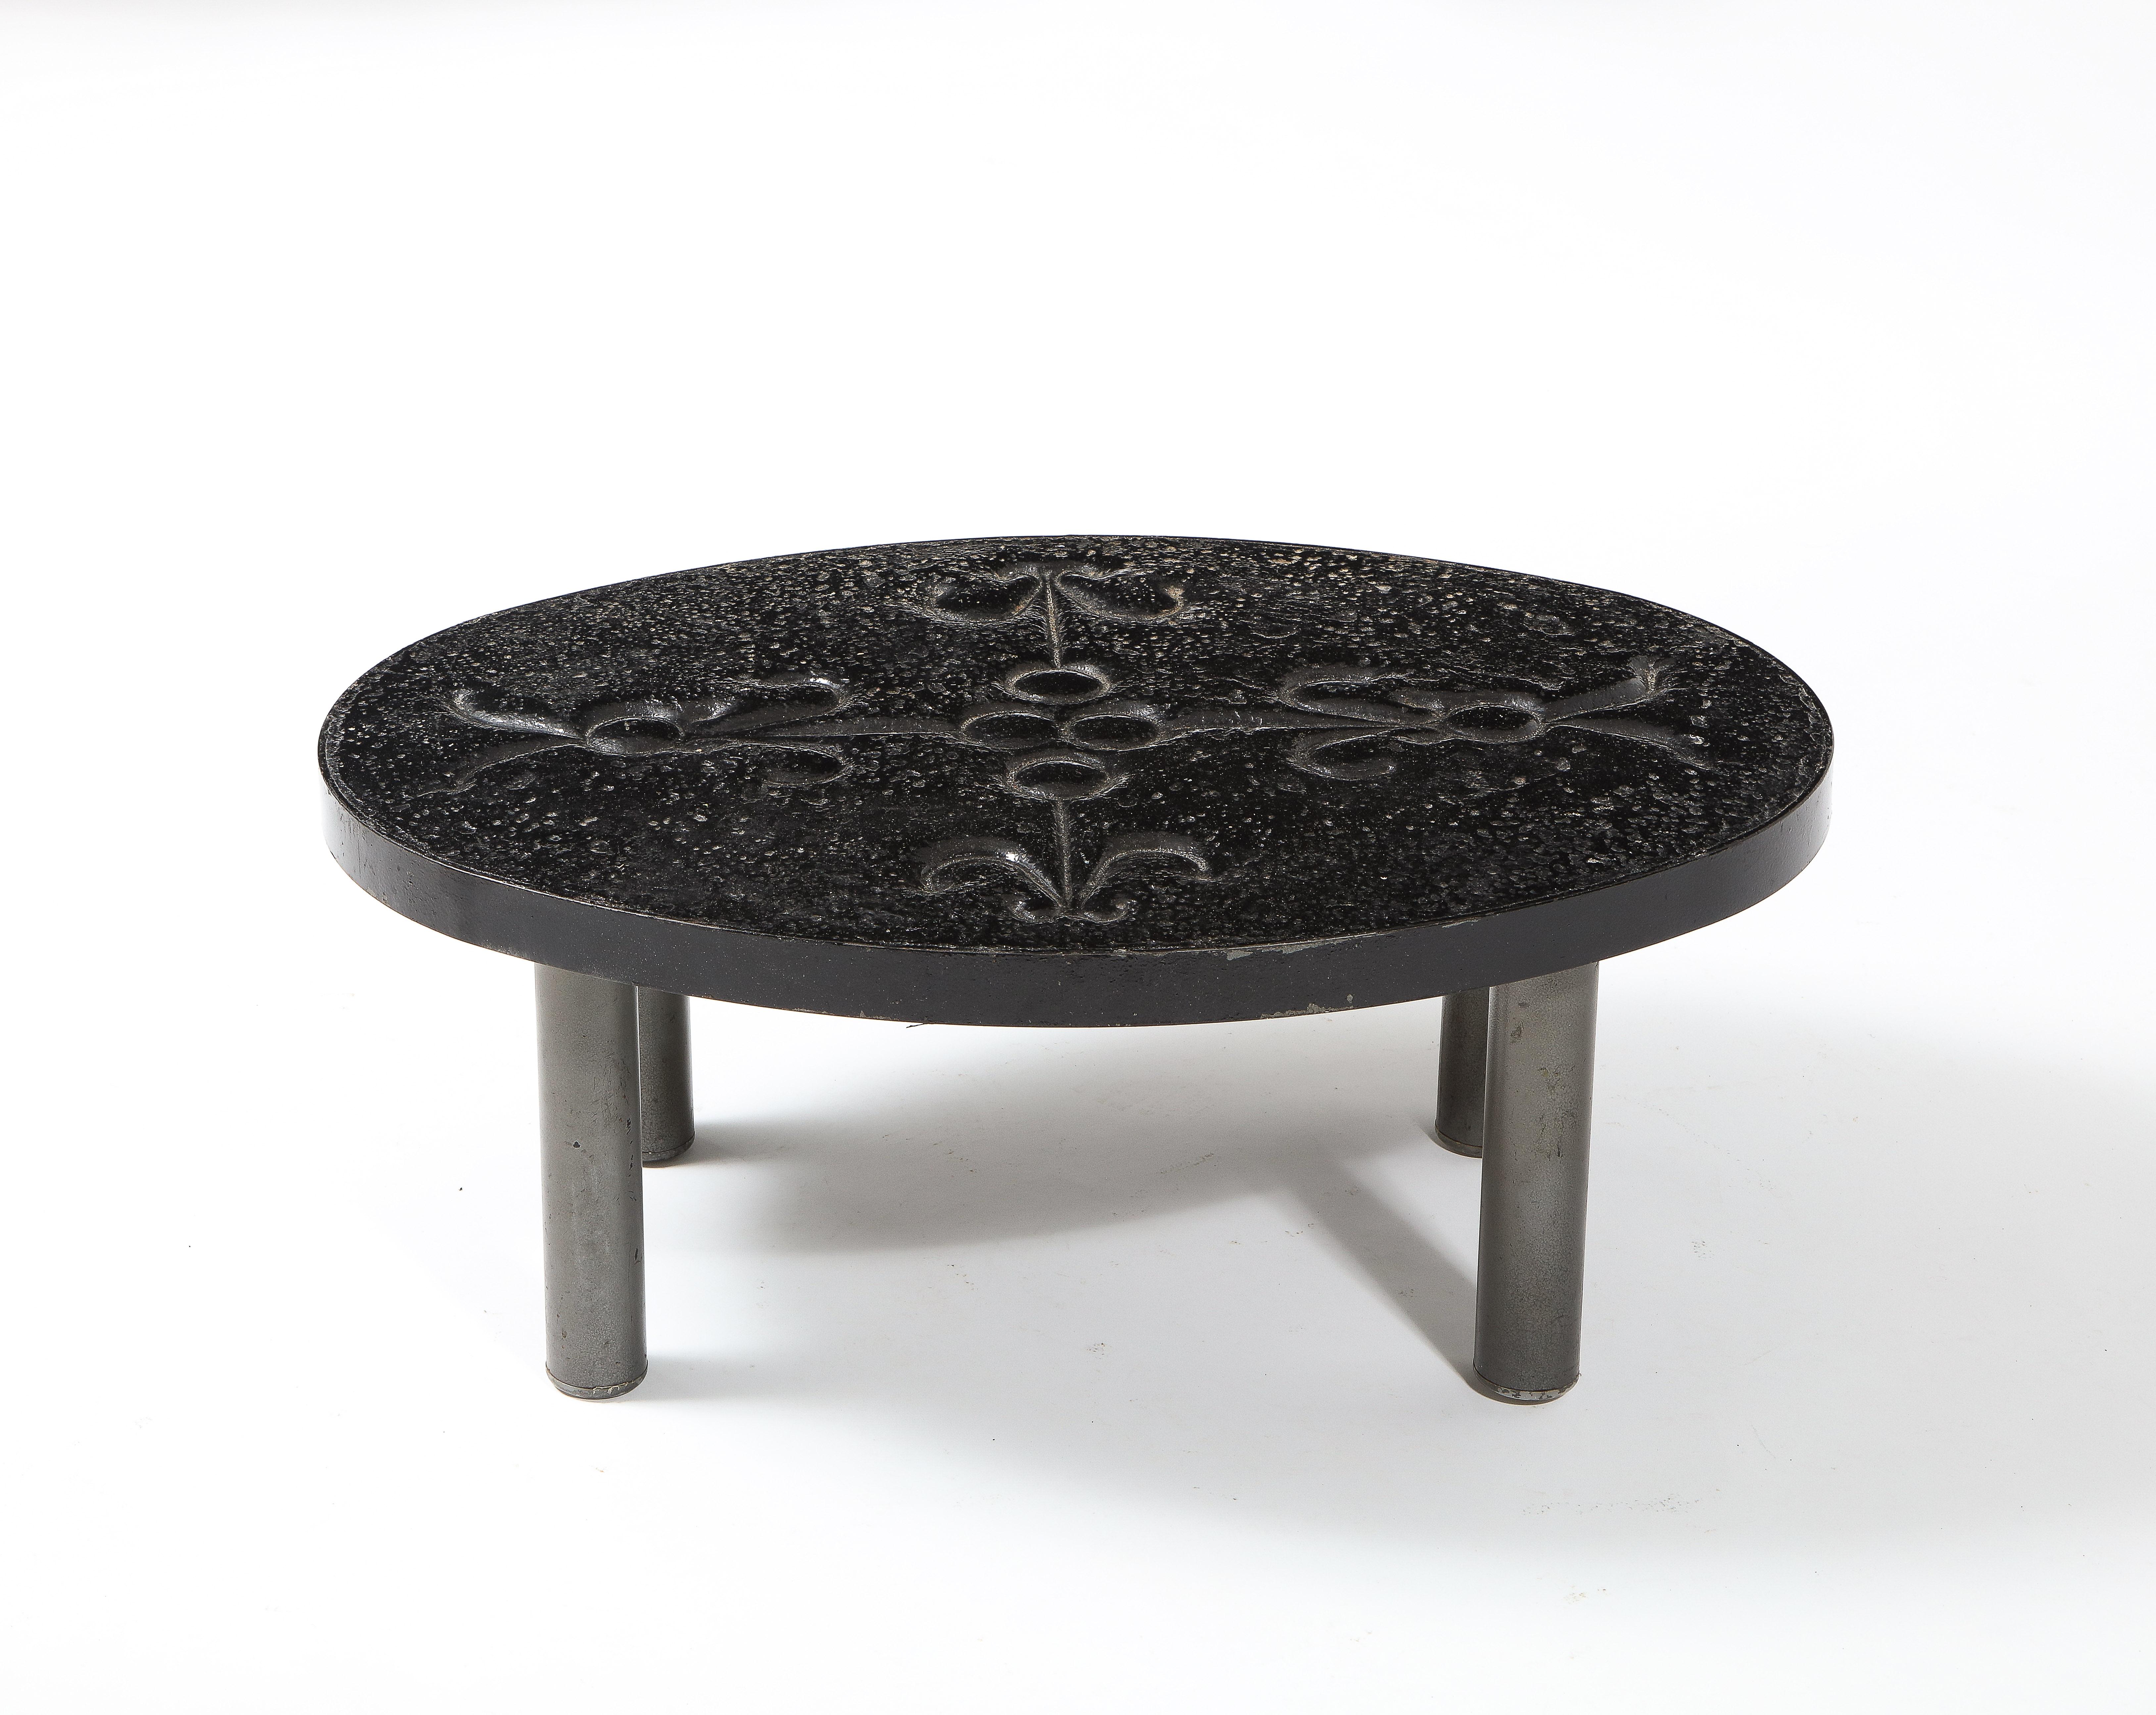 French Enameled Lava Stone Small Coffee Table in Vallauris Style, 1960's France.

Interesting scale, shape and motif. 

We have another in this style with the top in wood. 